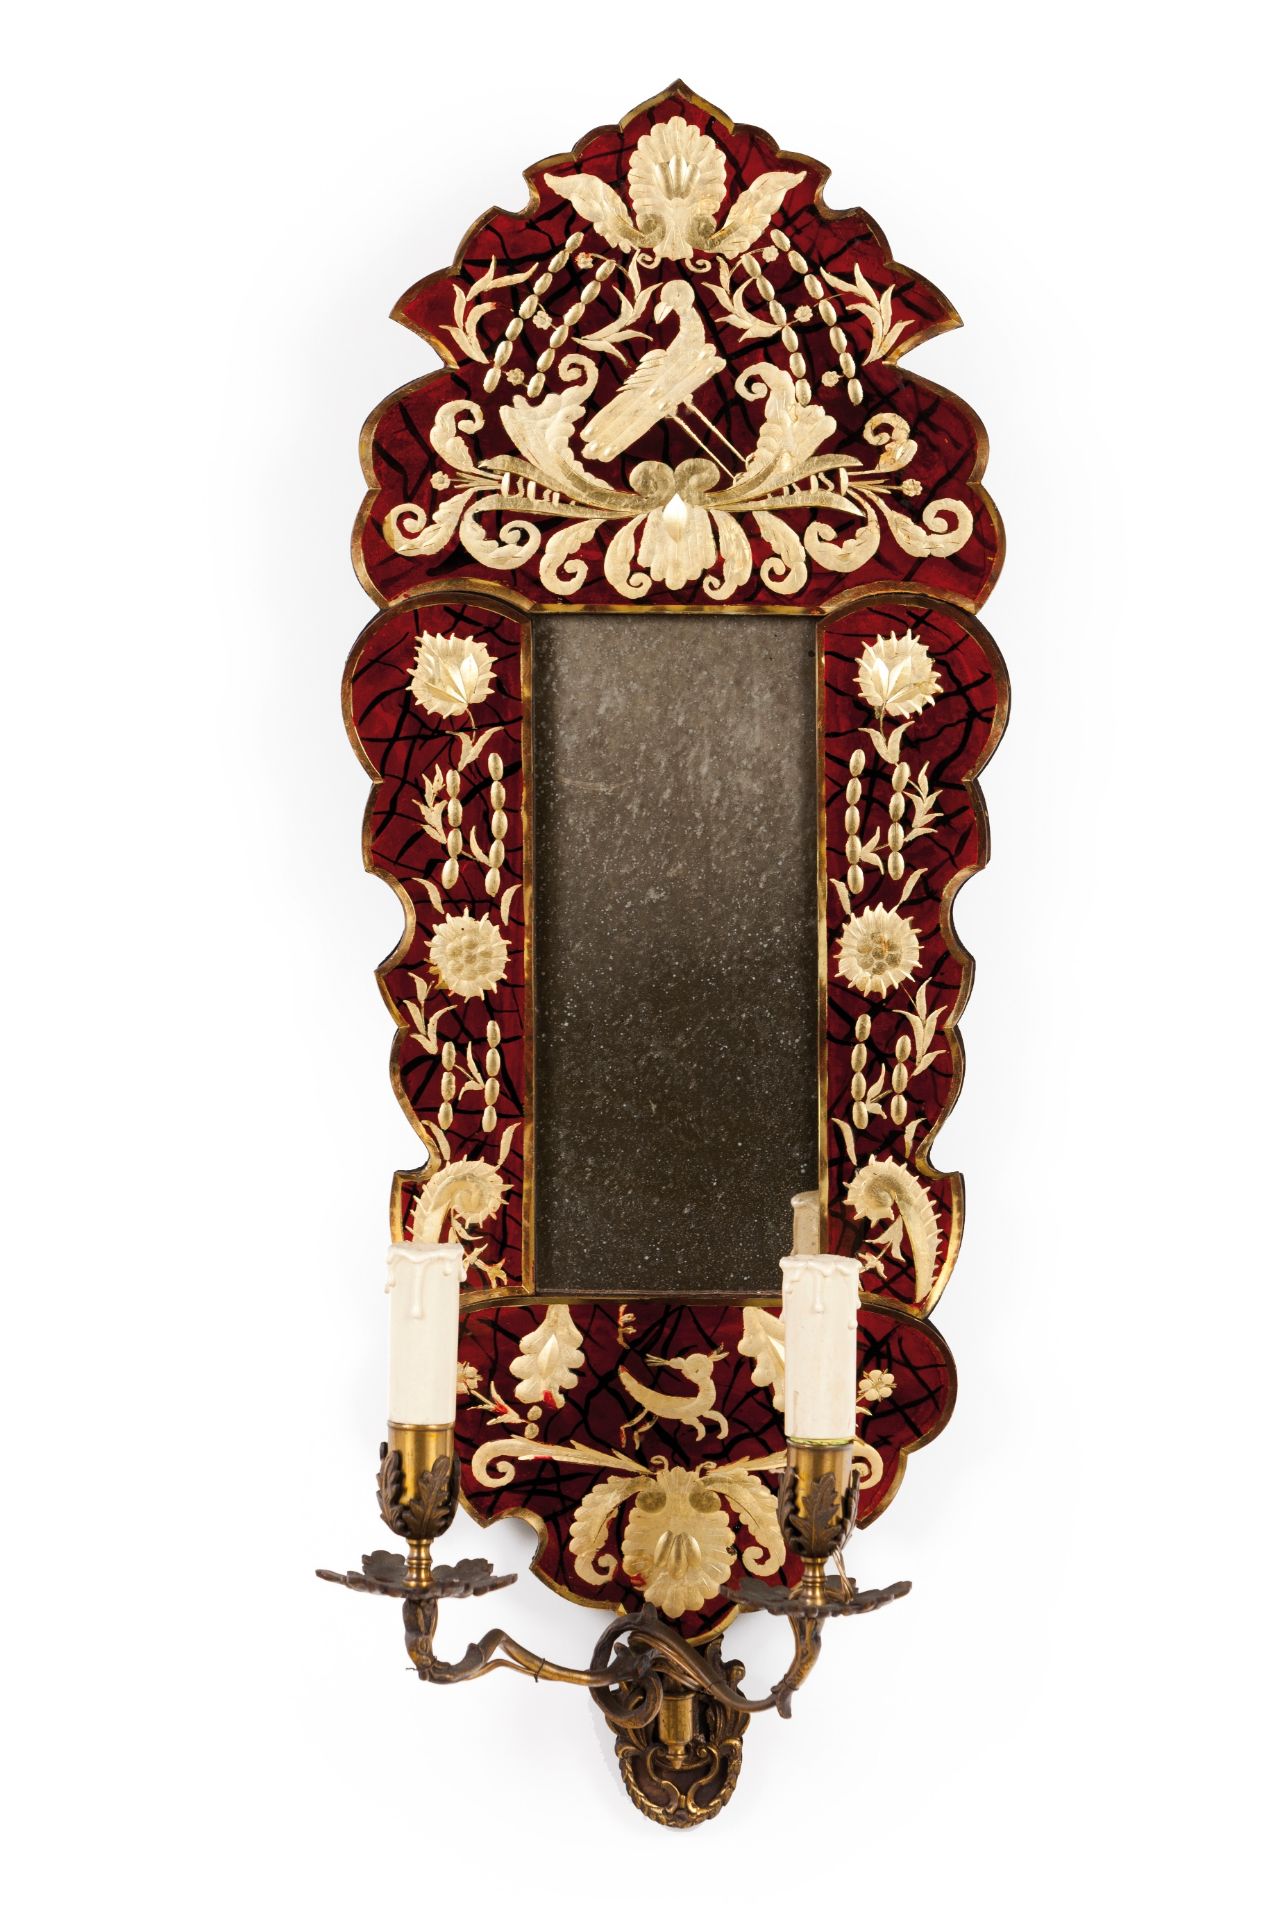 A pair of Venetian mirrors with sconces - Image 2 of 2